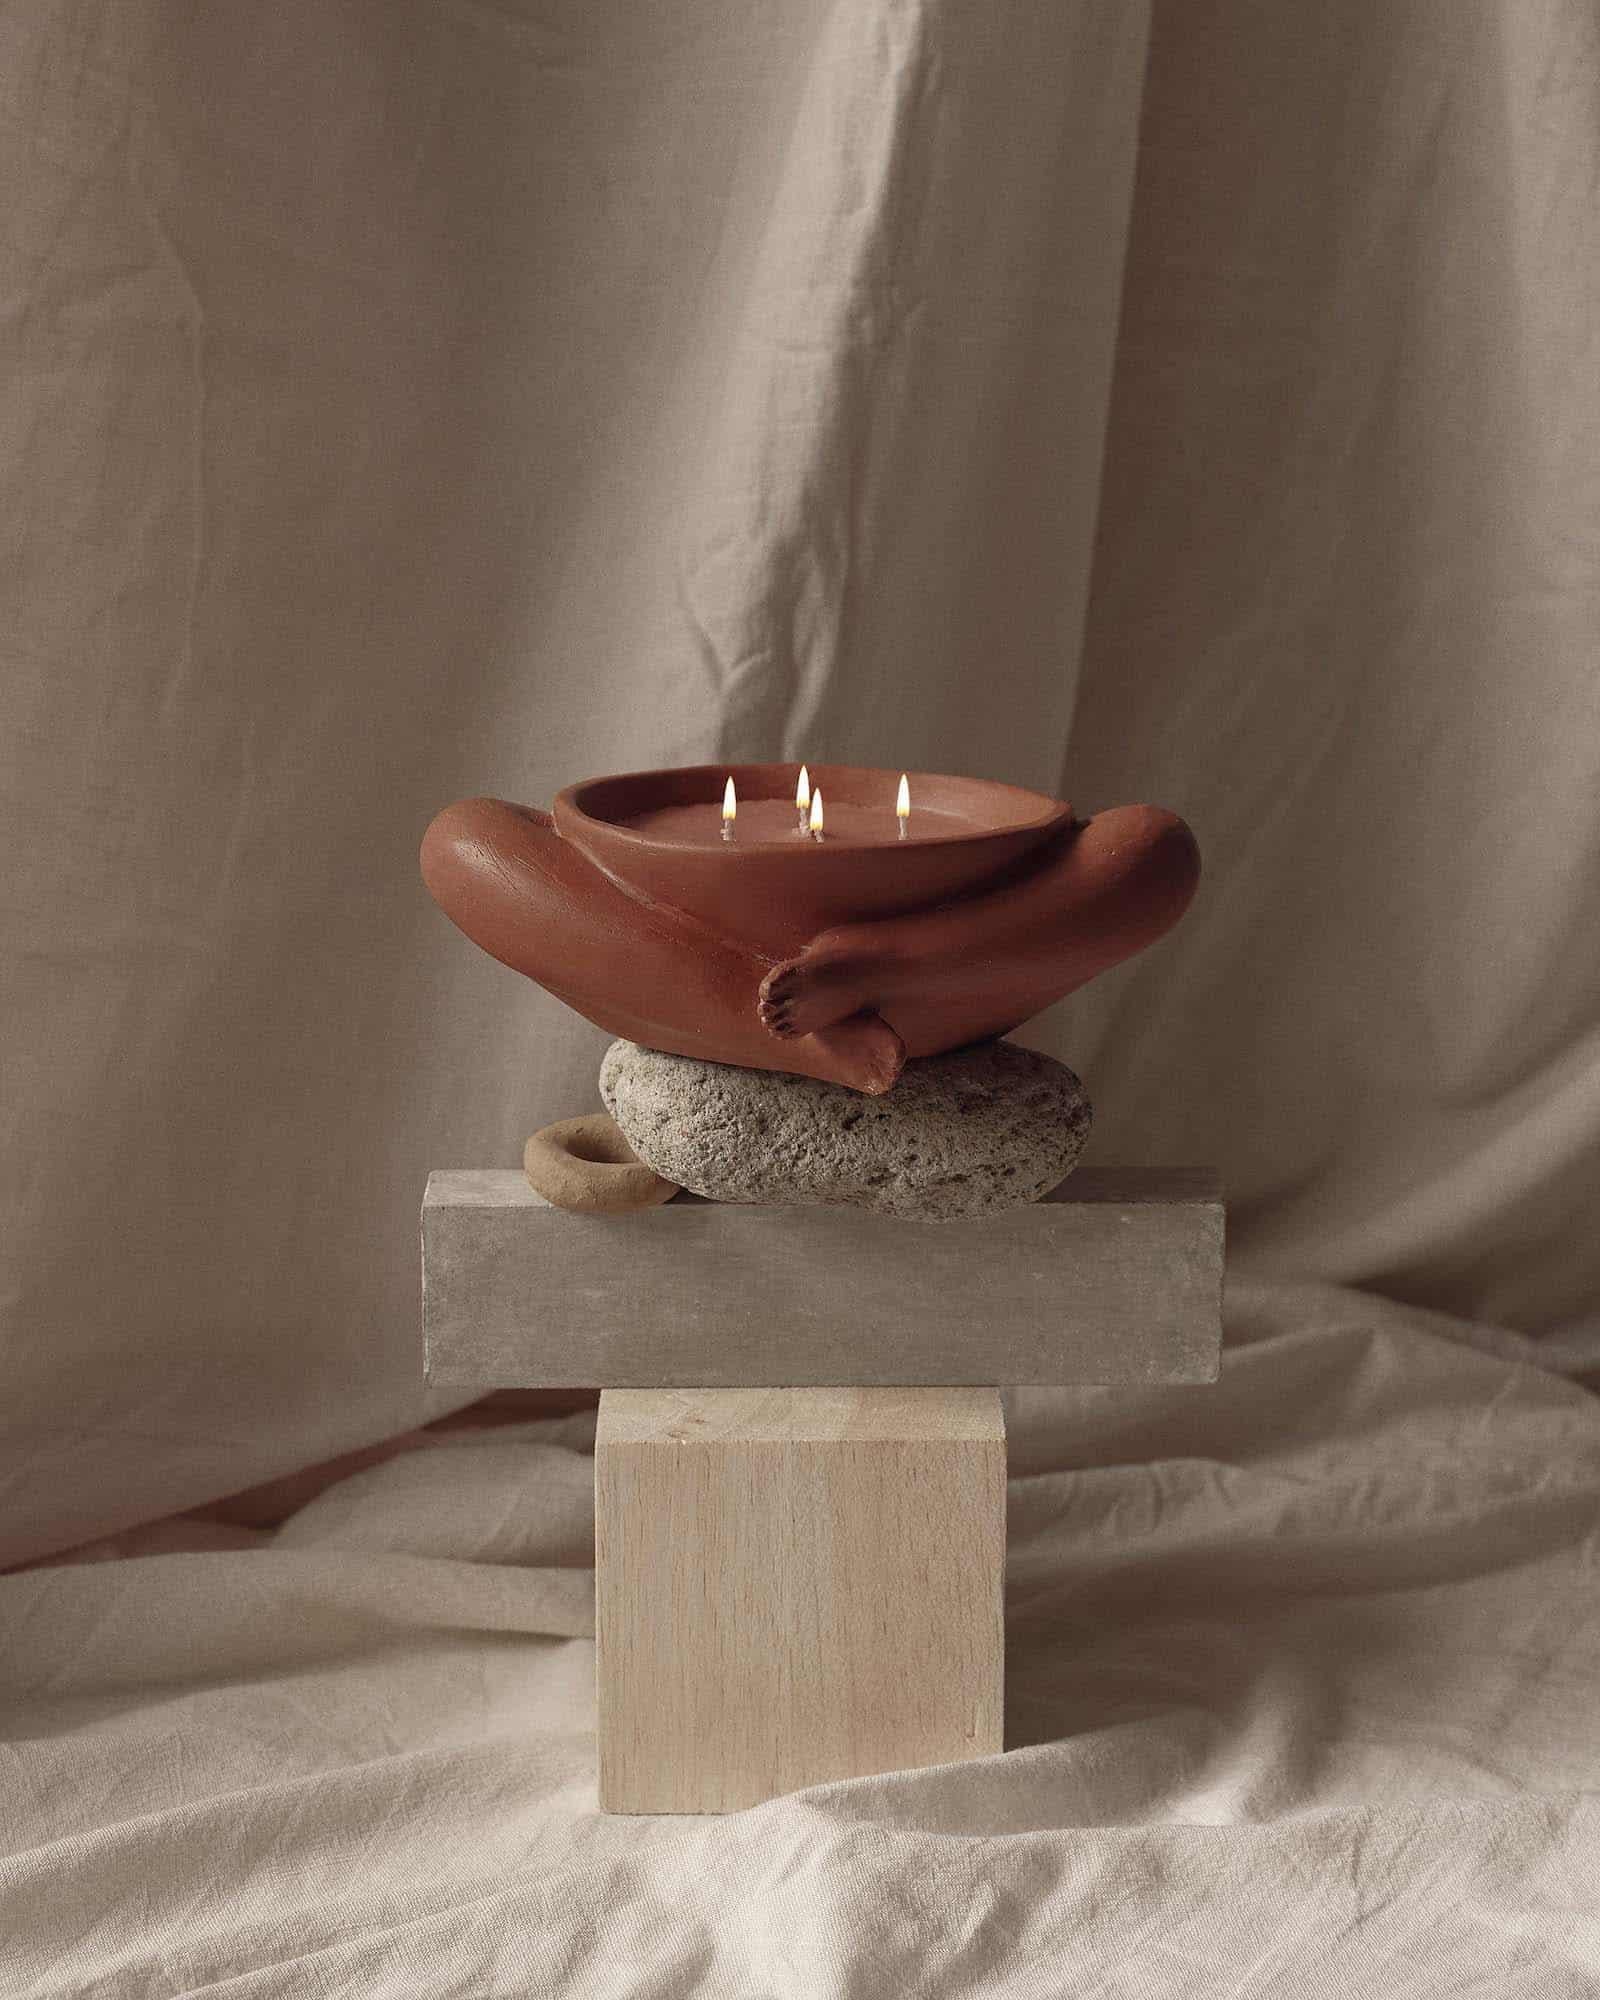 Tobacco sculpture with candle by Marcela Cure
Dimensions: W 19 x D 14 x H 6 cm
Materials: Resin and Stone Composite
Also Available: Sandalwood and Biblichor colours available.
Notes: star anise, cedar leaf, sandalwood, amber, cedarwood and